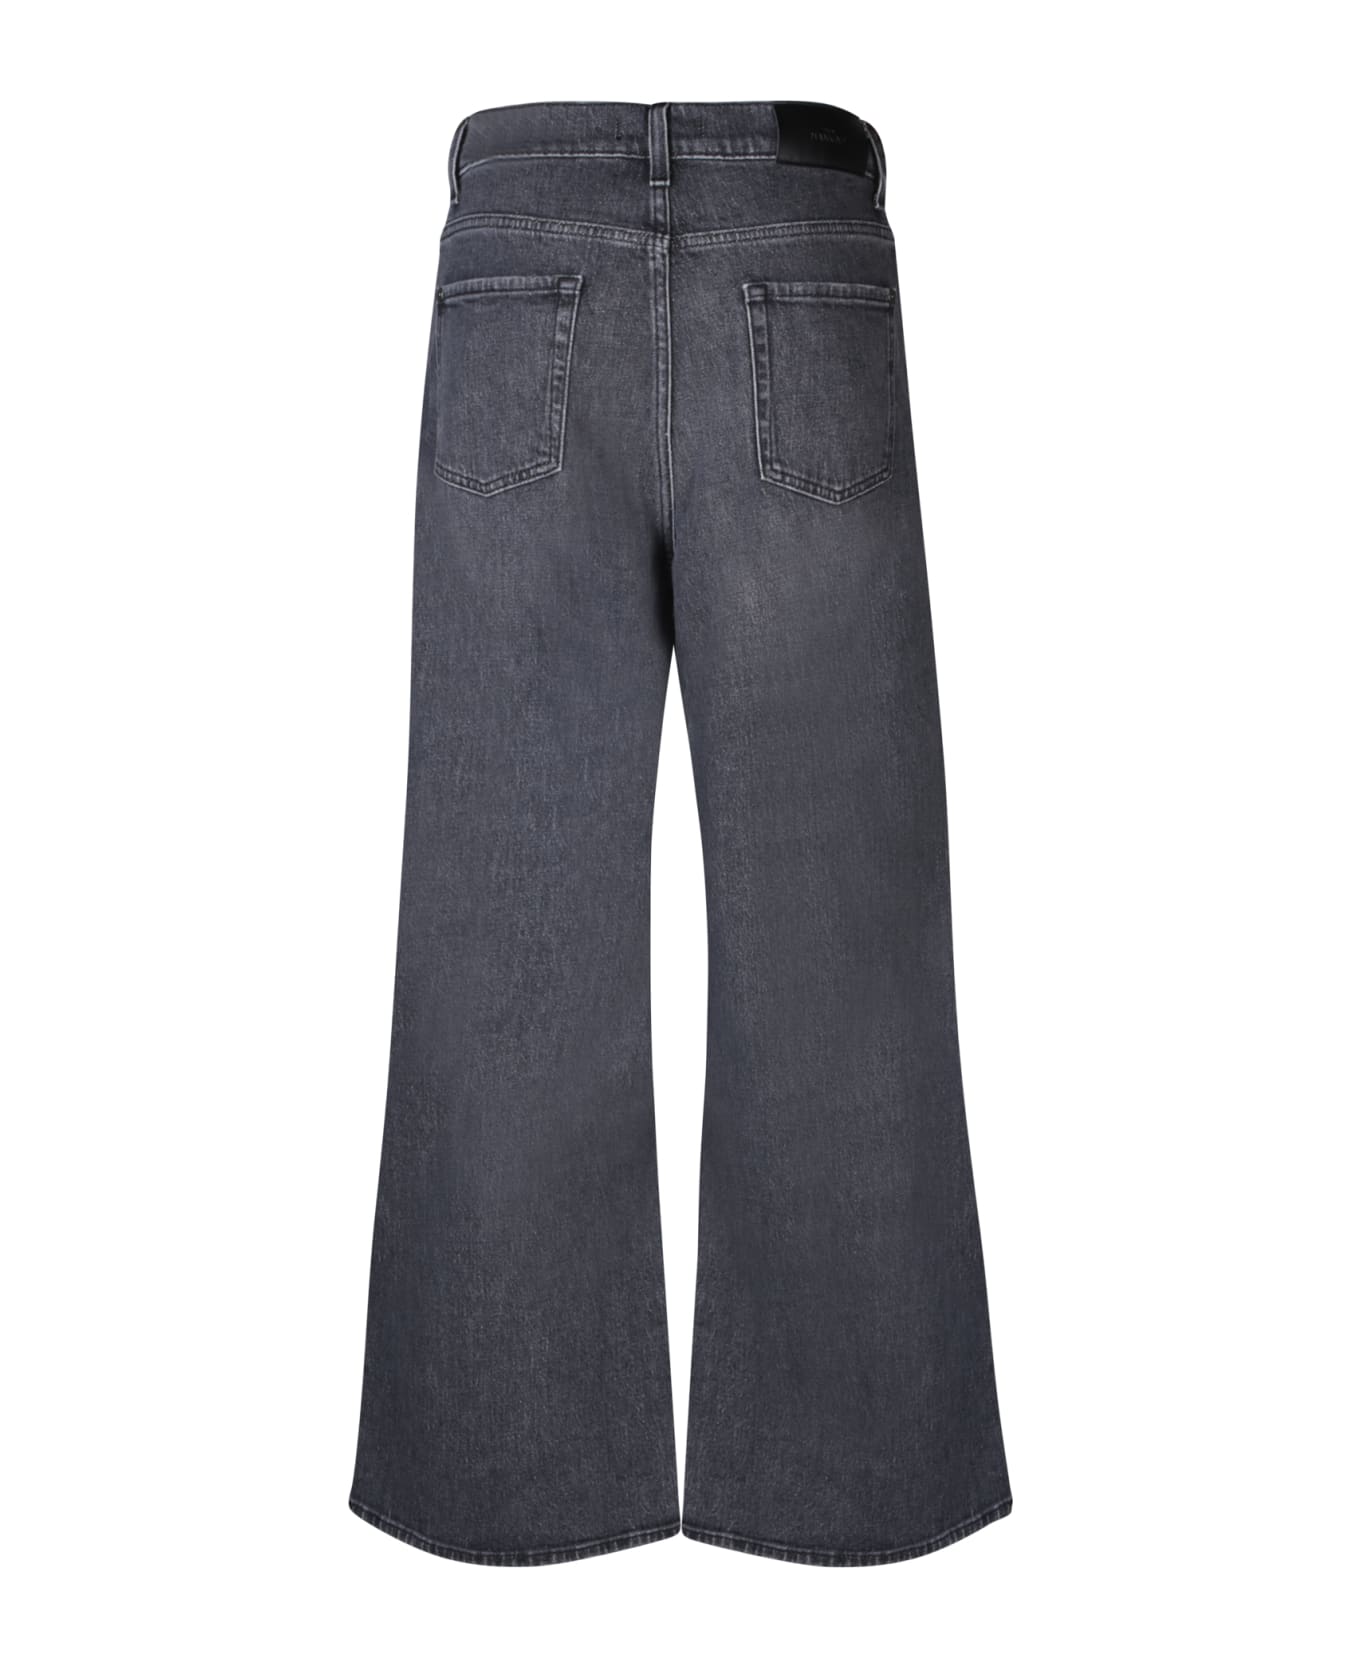 7 For All Mankind Zoey Grey Jeans - Grey